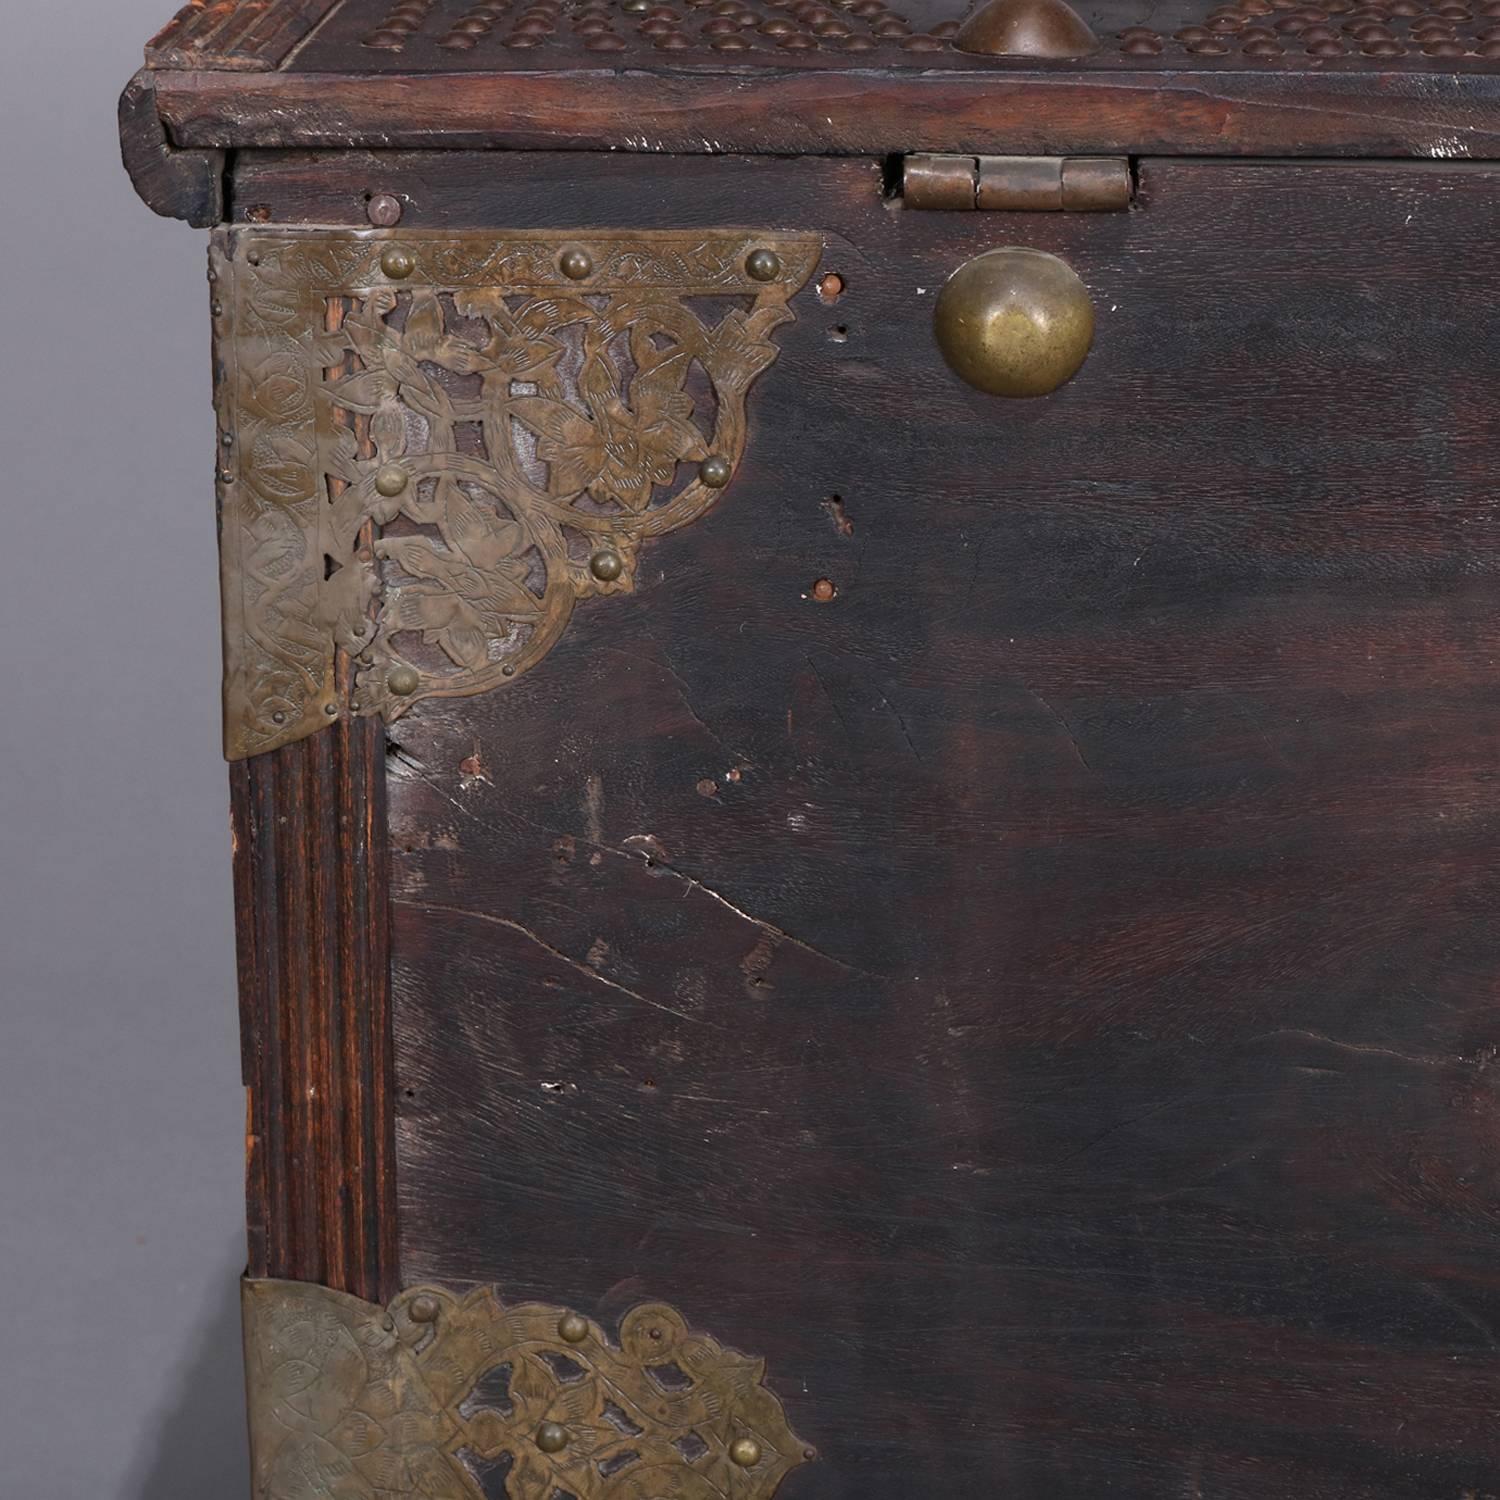 Antique Rosewood and Brass Turkish Marital Bride's Trunk, Early 19th Century 11